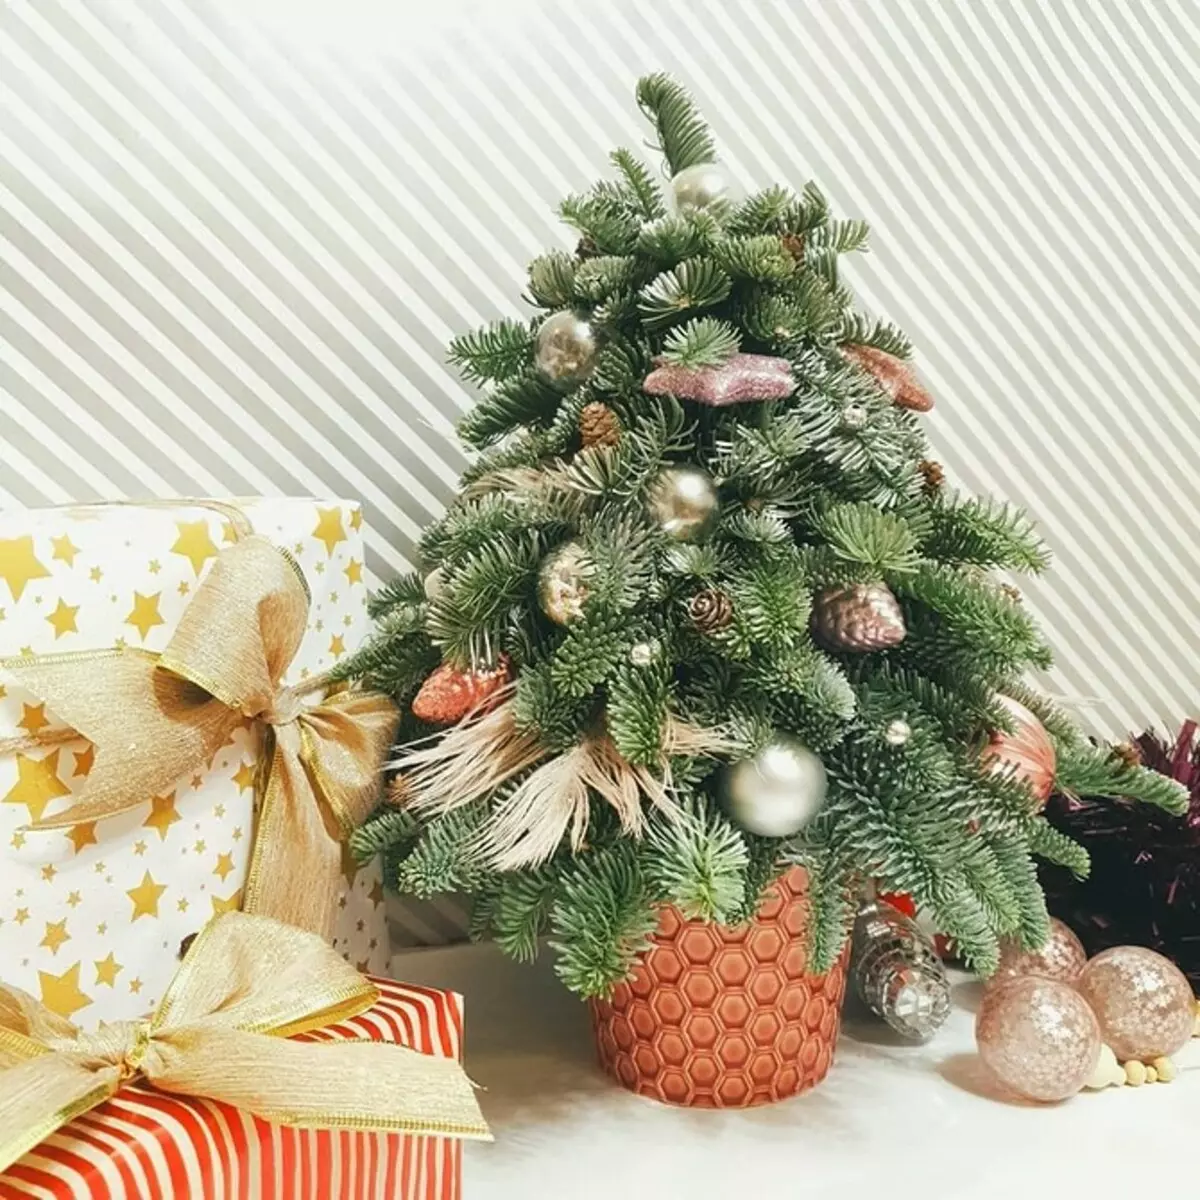 What to do with the Christmas tree after the holidays: 4 practical ideas 5189_17